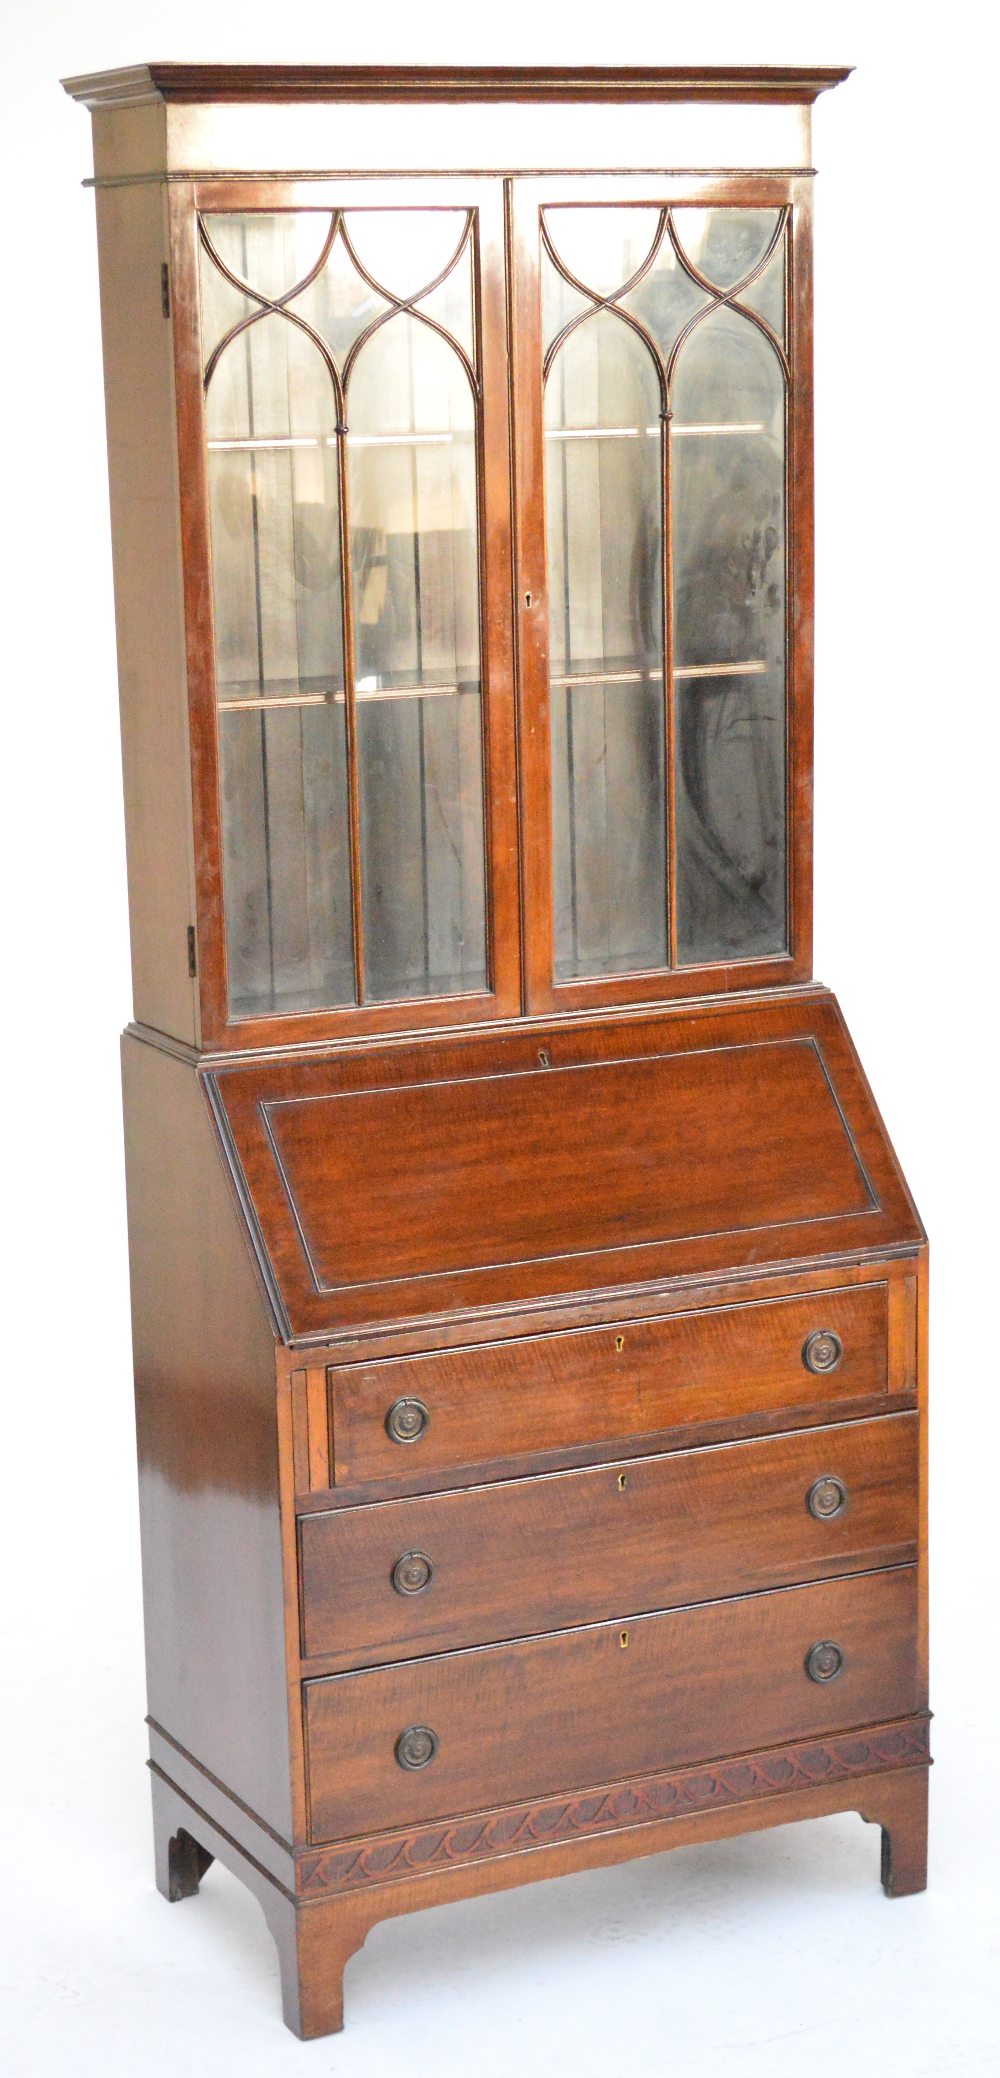 An early 20th century mahogany bureau bookcase with pair of glazed doors above fall front and